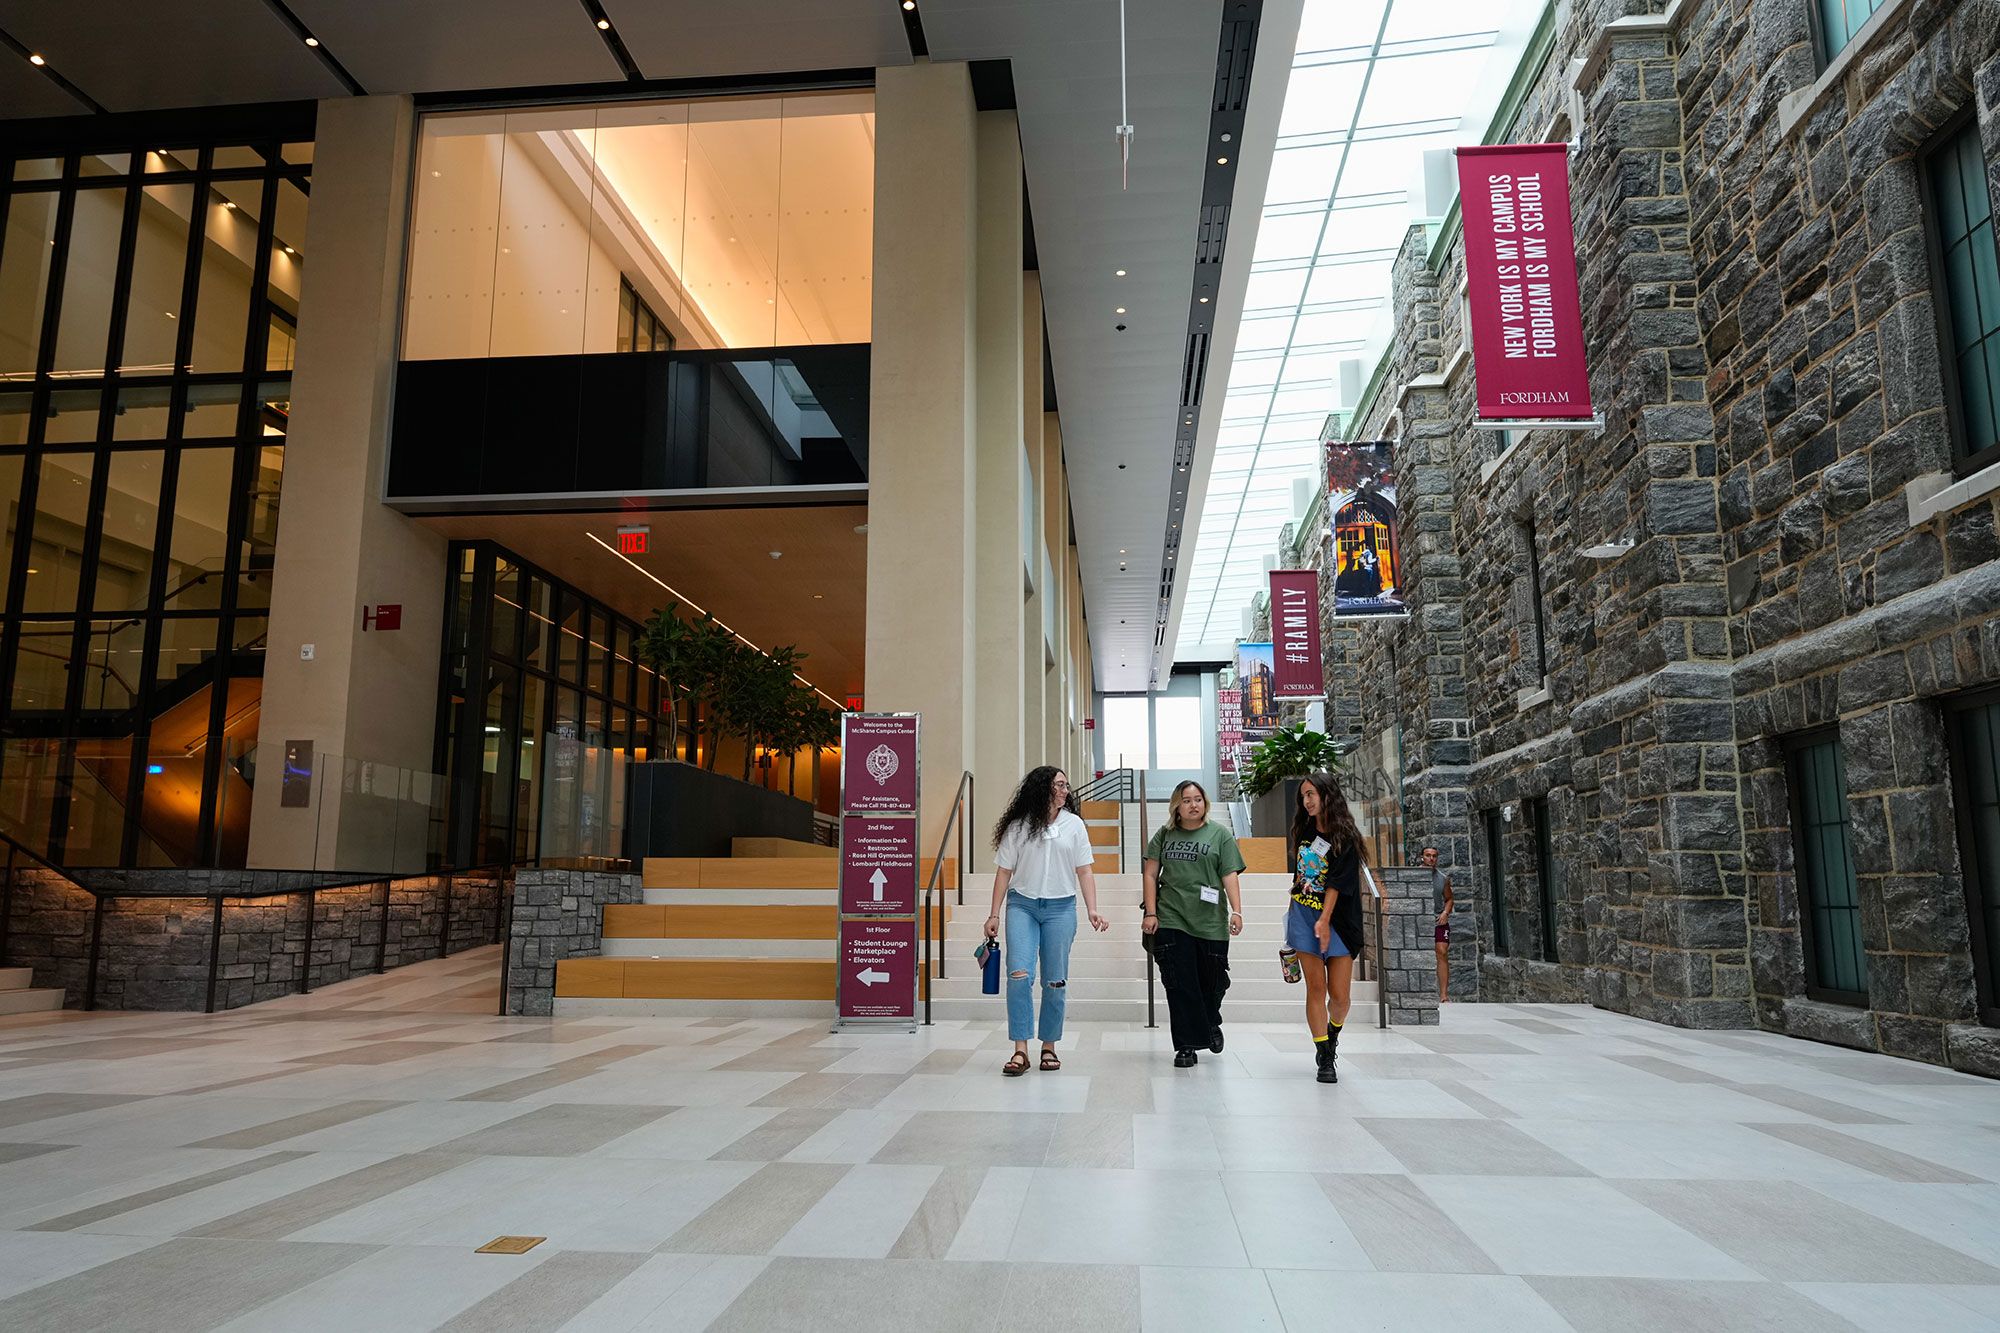 Students walk through the arcade in the McShane Center